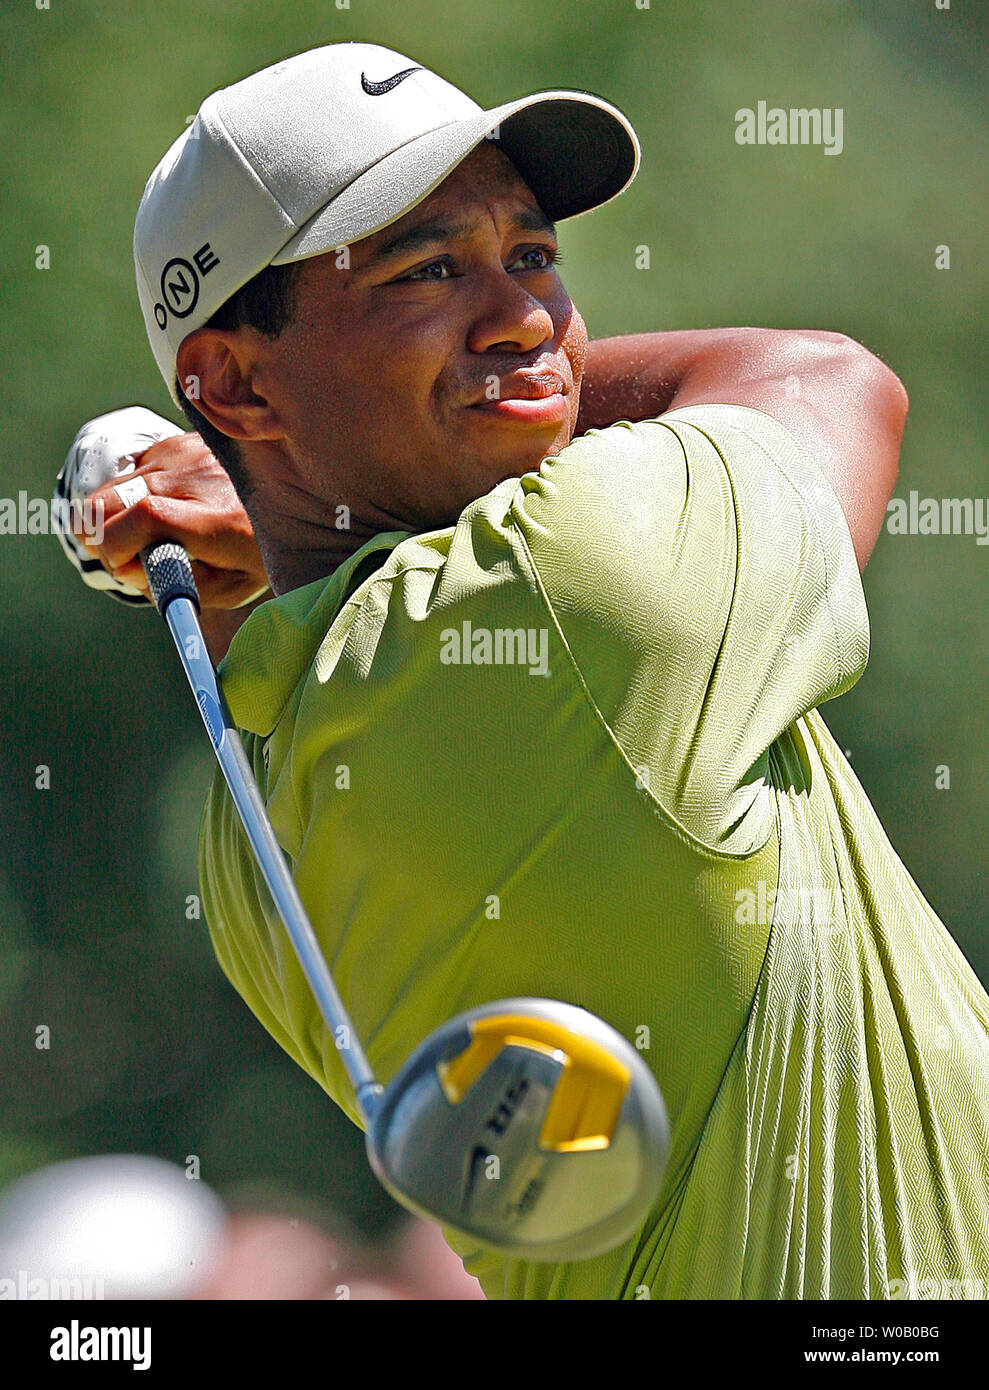 Leader Tiger Woods tees off from the second hole during the third round of the 89th PGA Championship at Southern Hills Country Club in Tulsa, Oklahoma on August 11, 2007.   (UPI Photo/Gary C. Caskey) Stock Photo